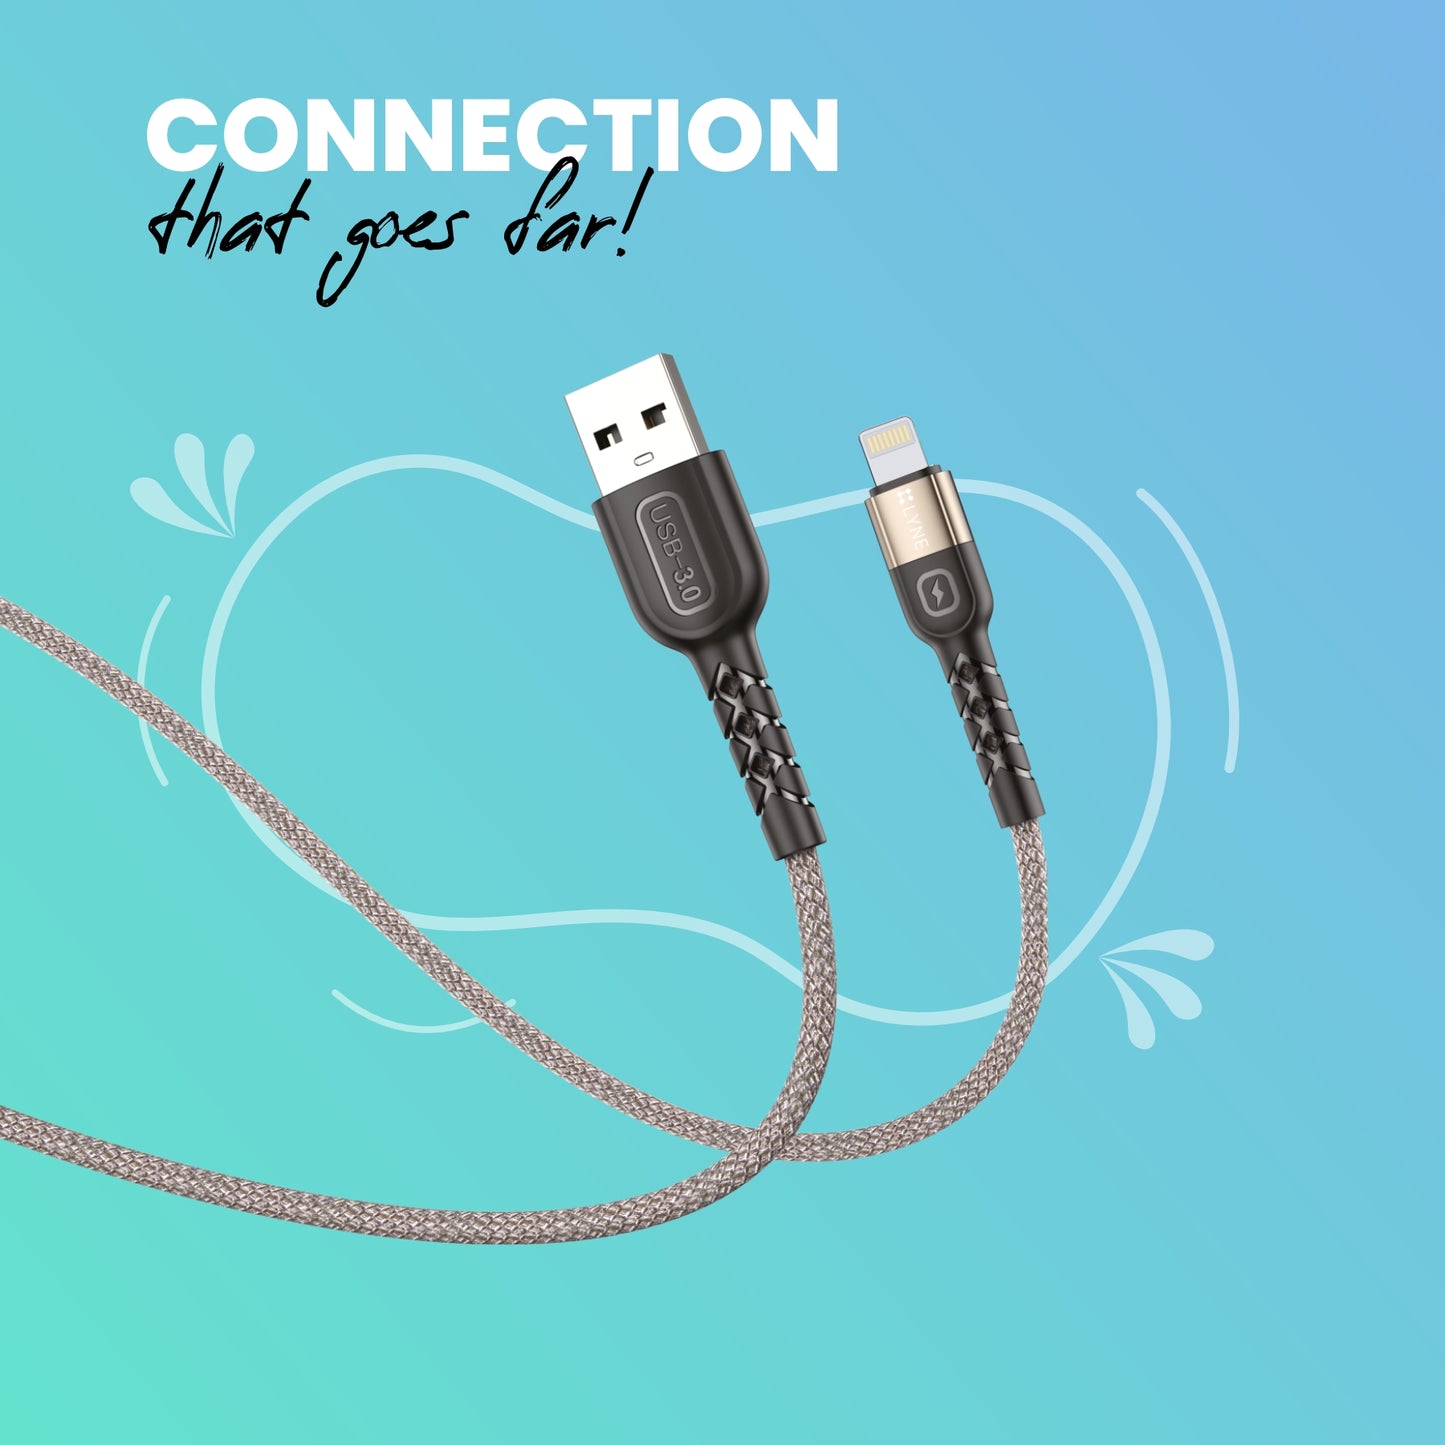 LYNE Flexy 6 4A Output, 1 m, Lightning High Quality Braided Data Cable with 50k+ Bend Test